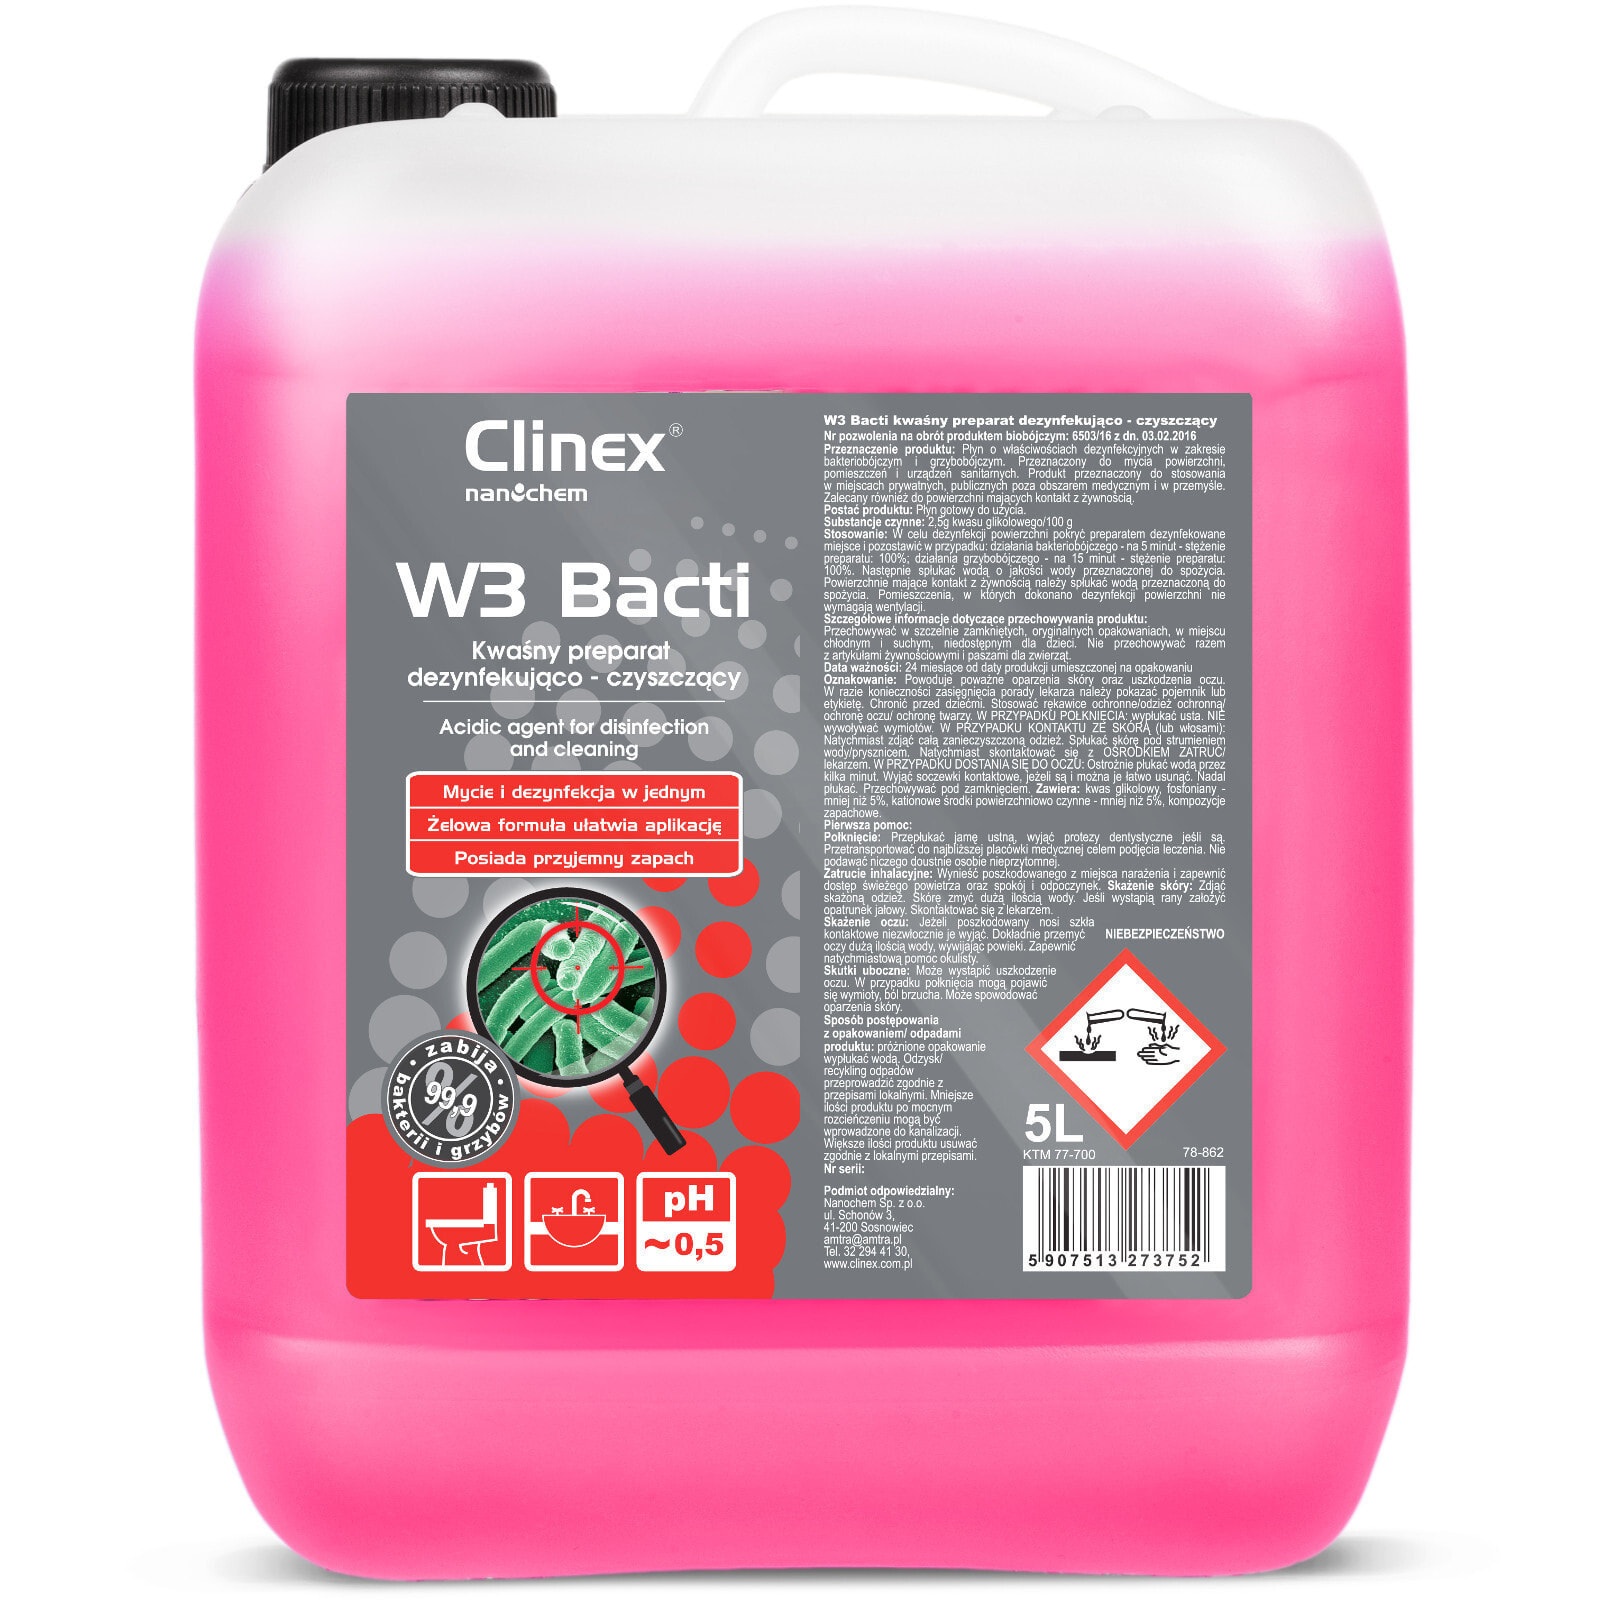 CLINEX W3 Bacti 5L bactericidal liquid for disinfecting and fumigating bathrooms and sanitary facilities